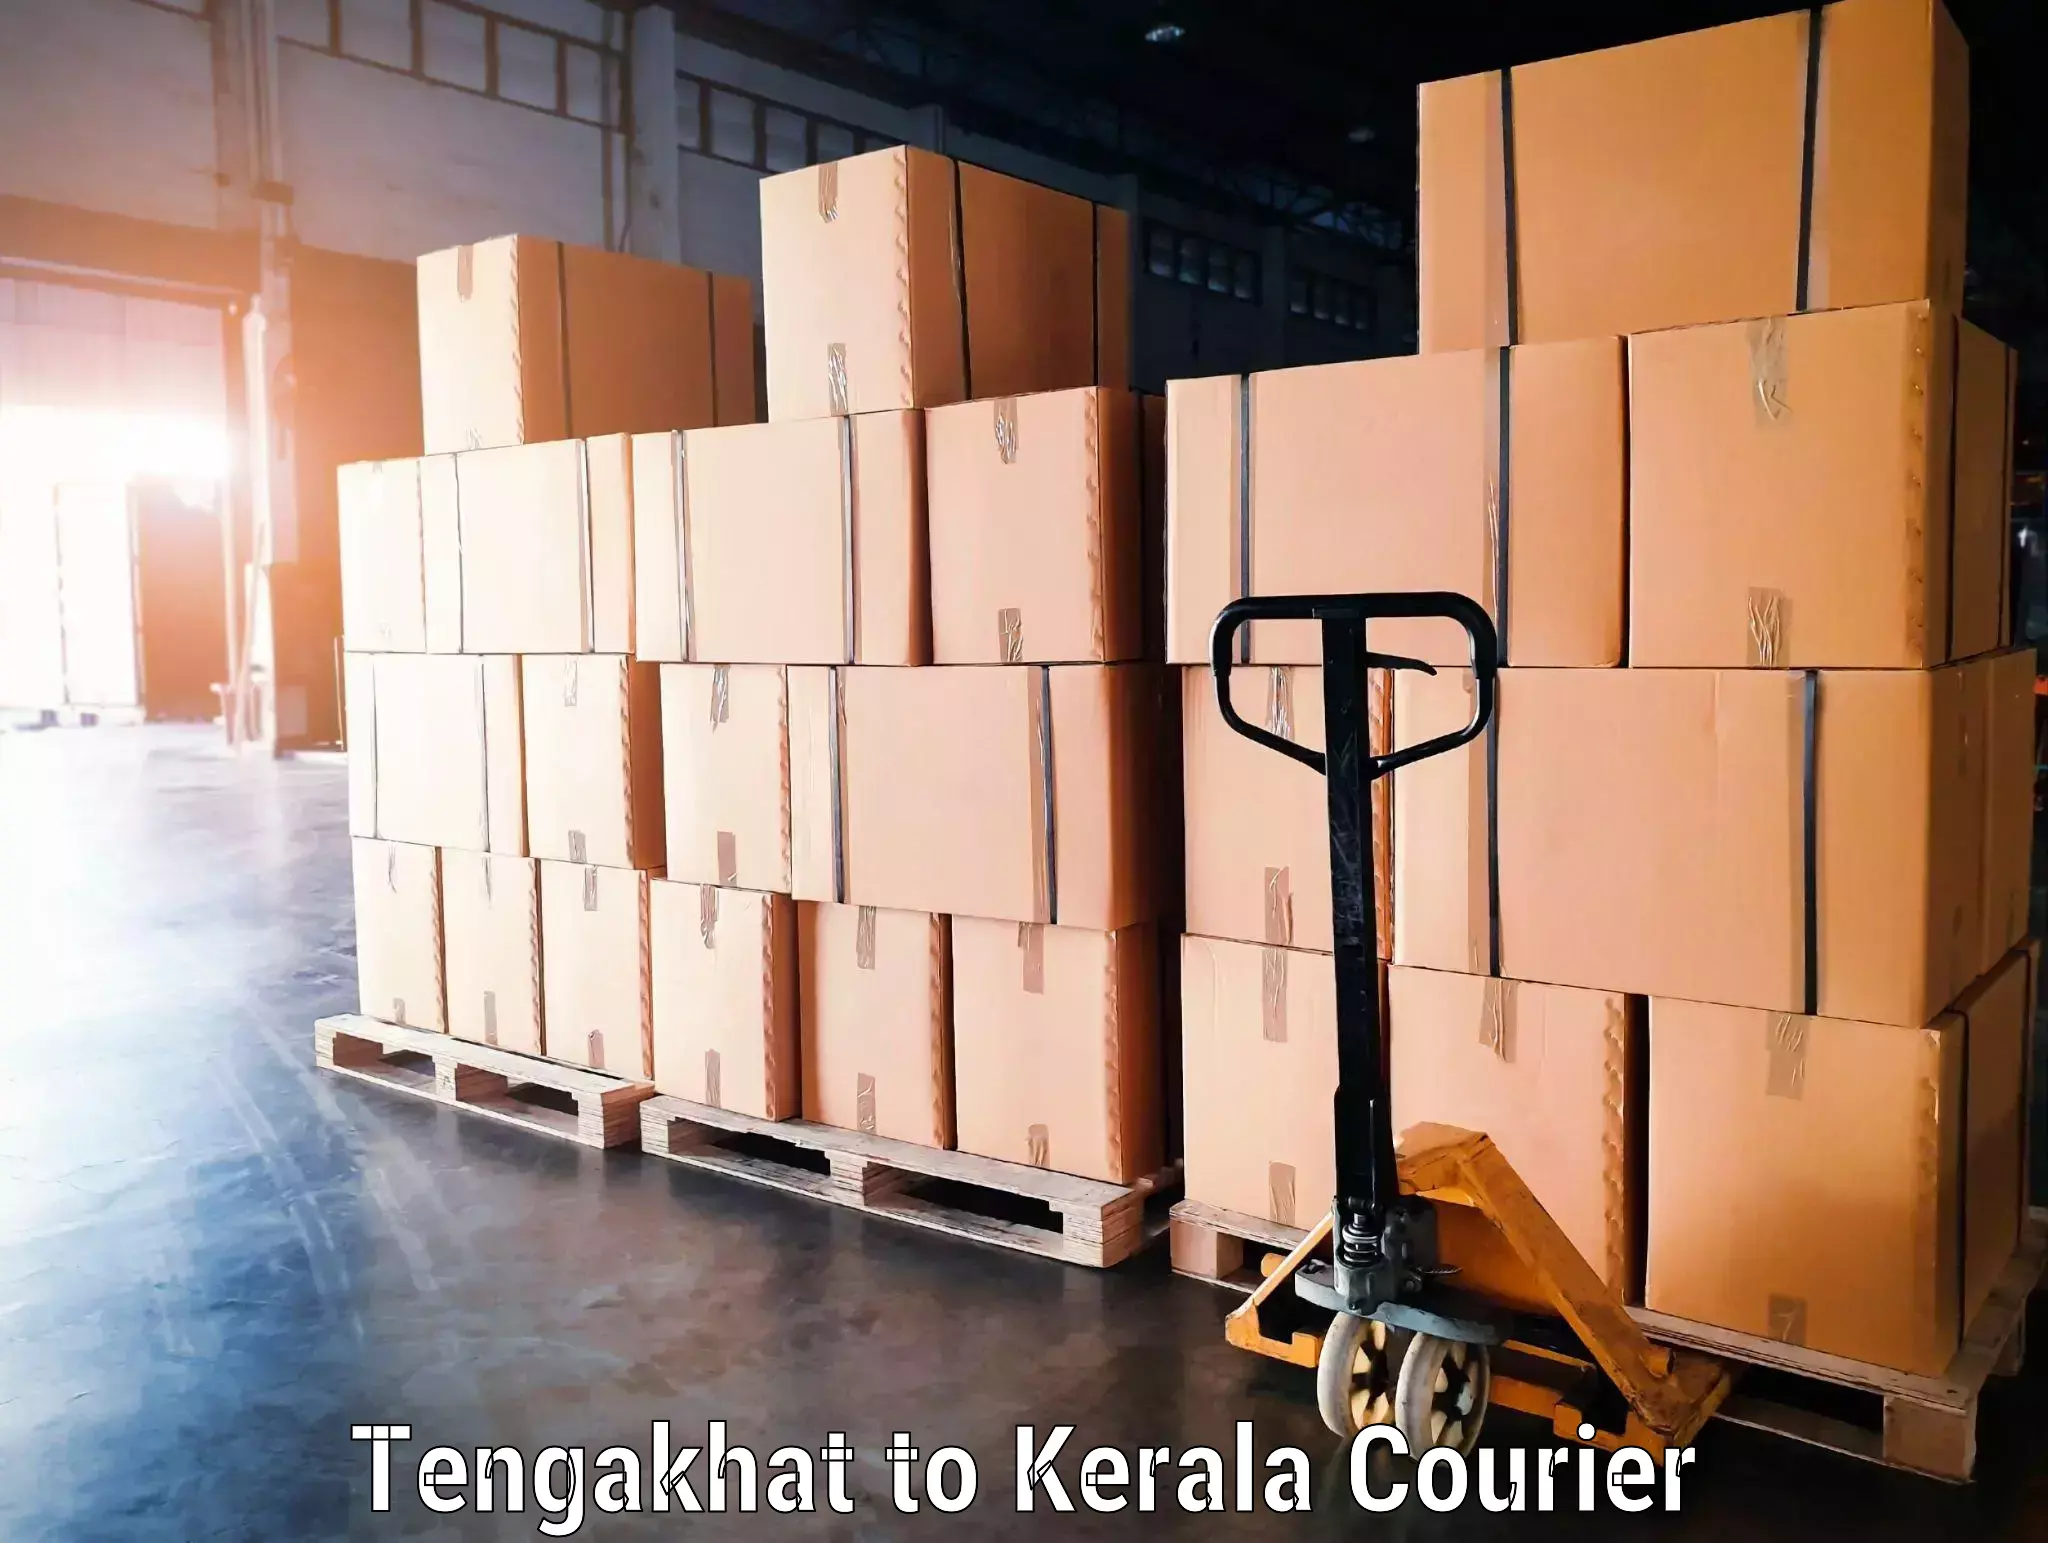 Luggage transport consultancy Tengakhat to Kerala